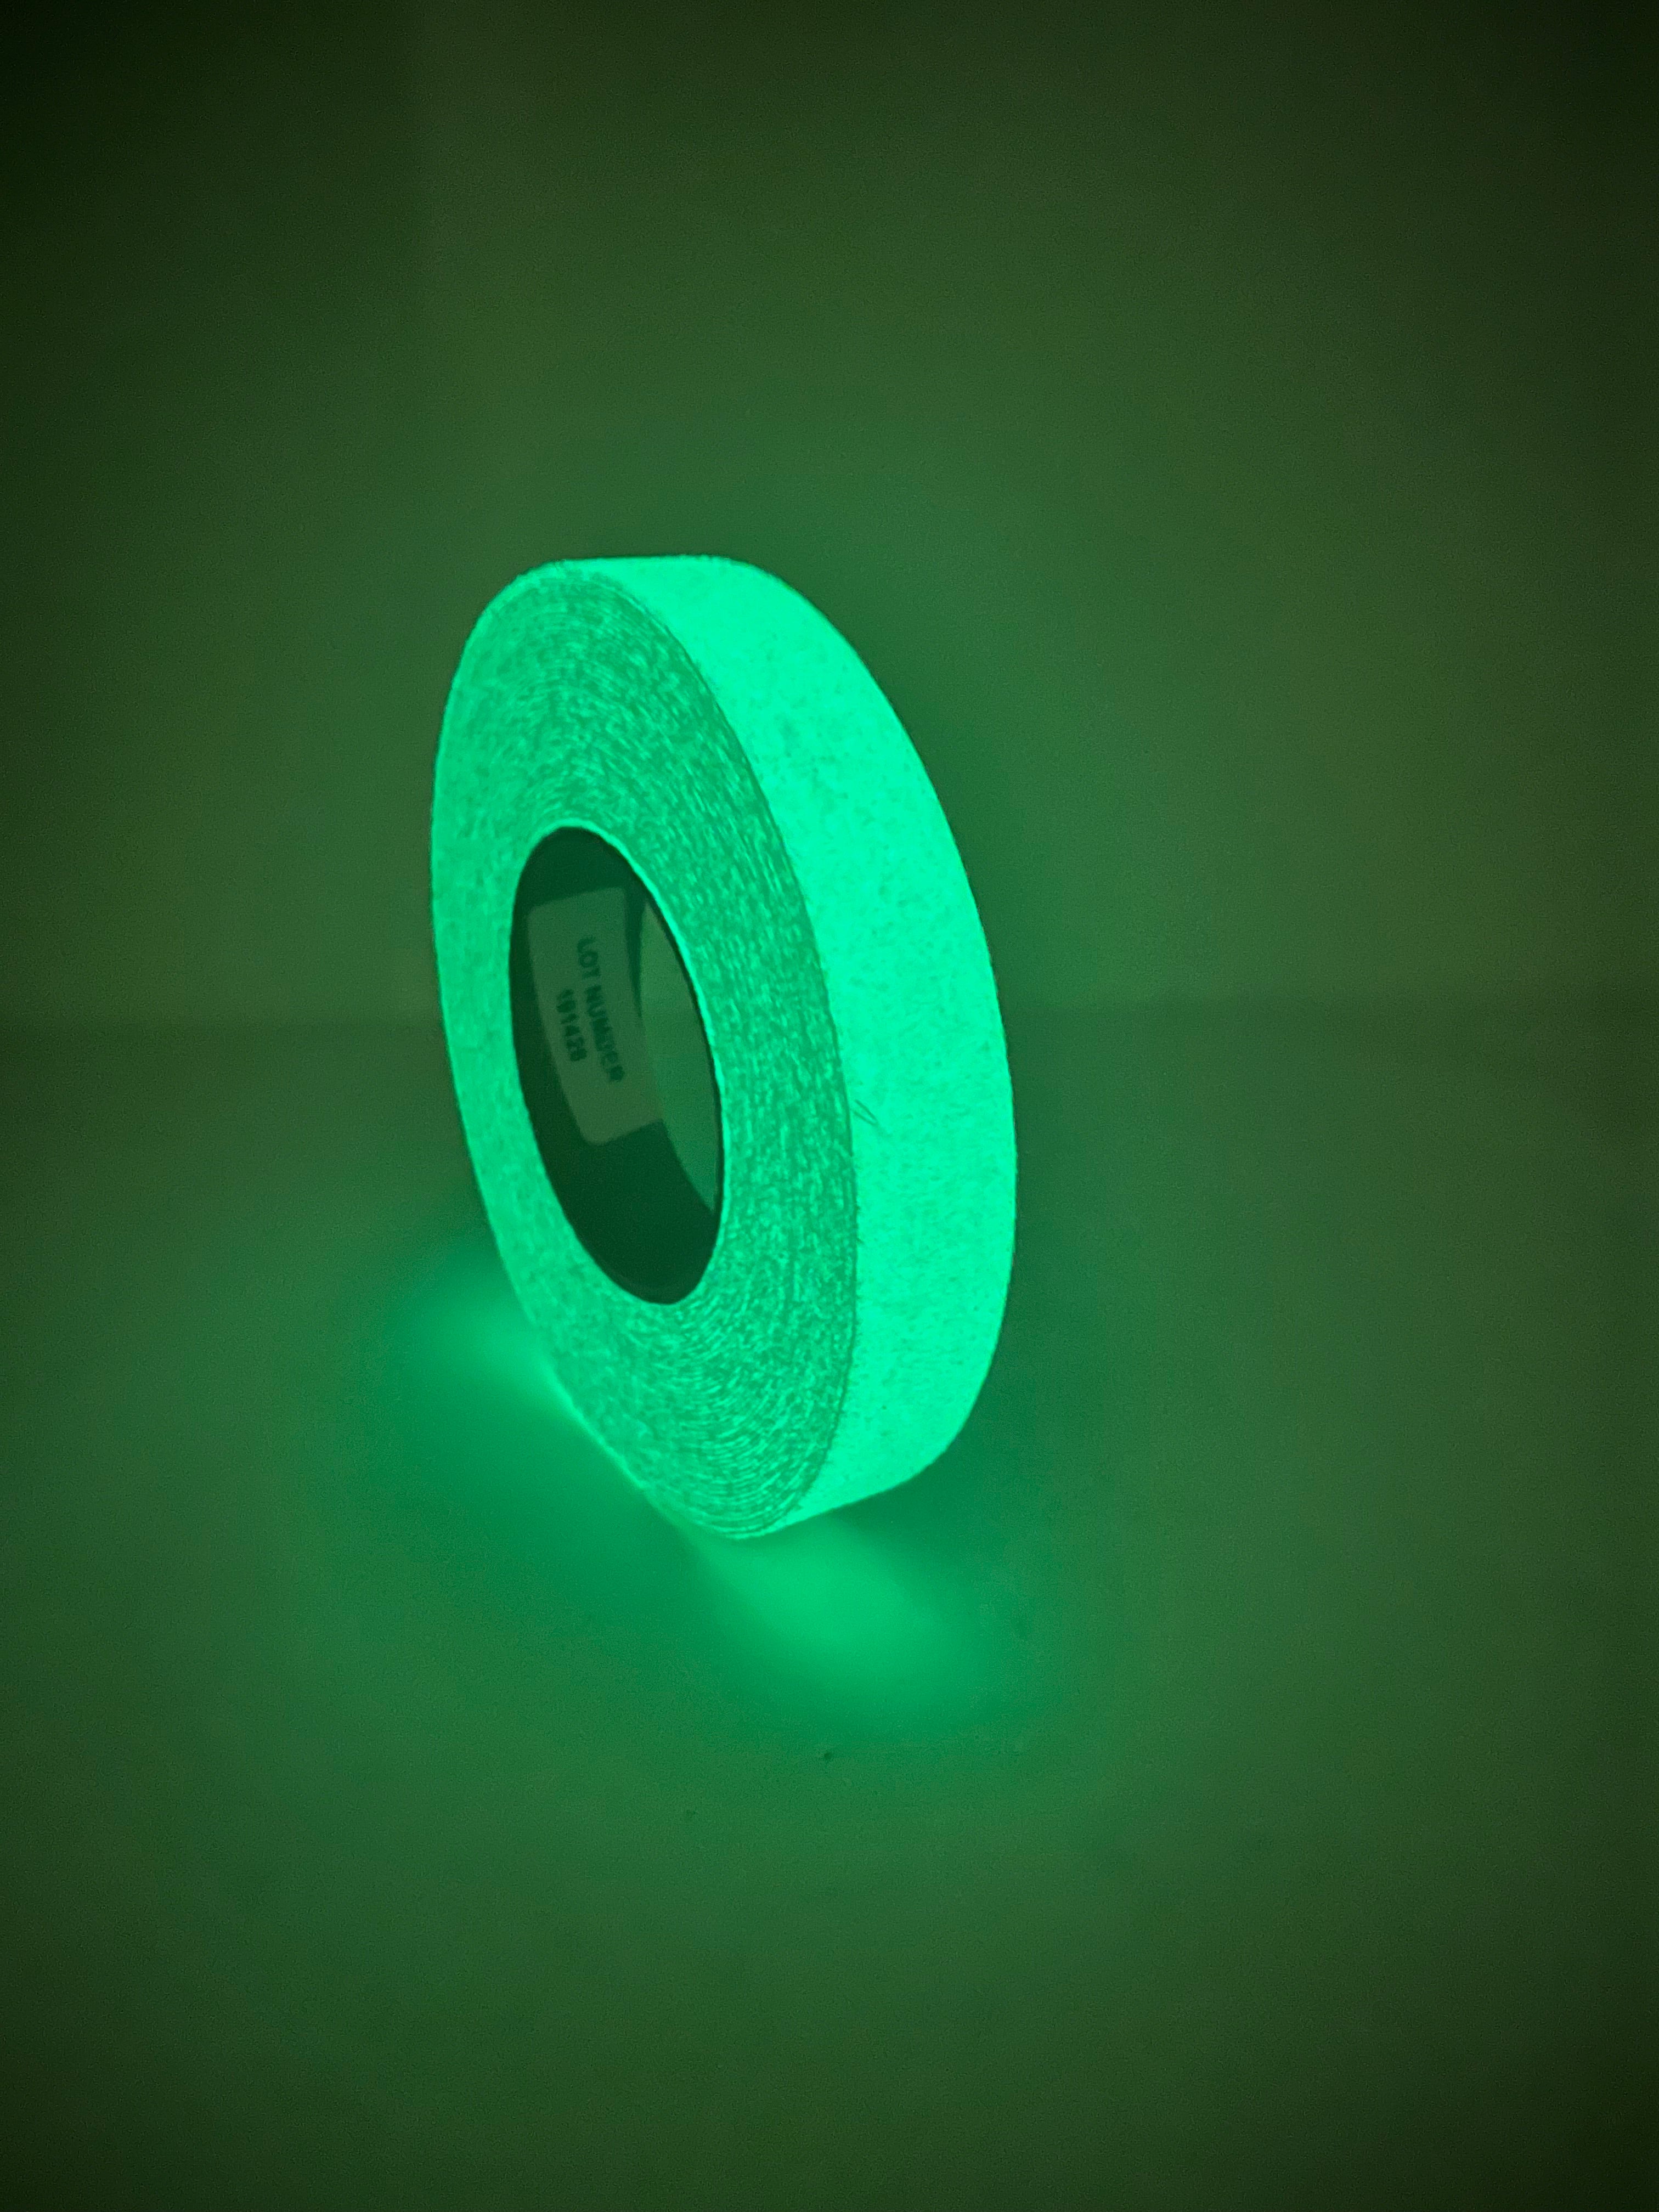 Anti Slip Grip Tape, Non-slip Traction Tapes with Glow in the Dark